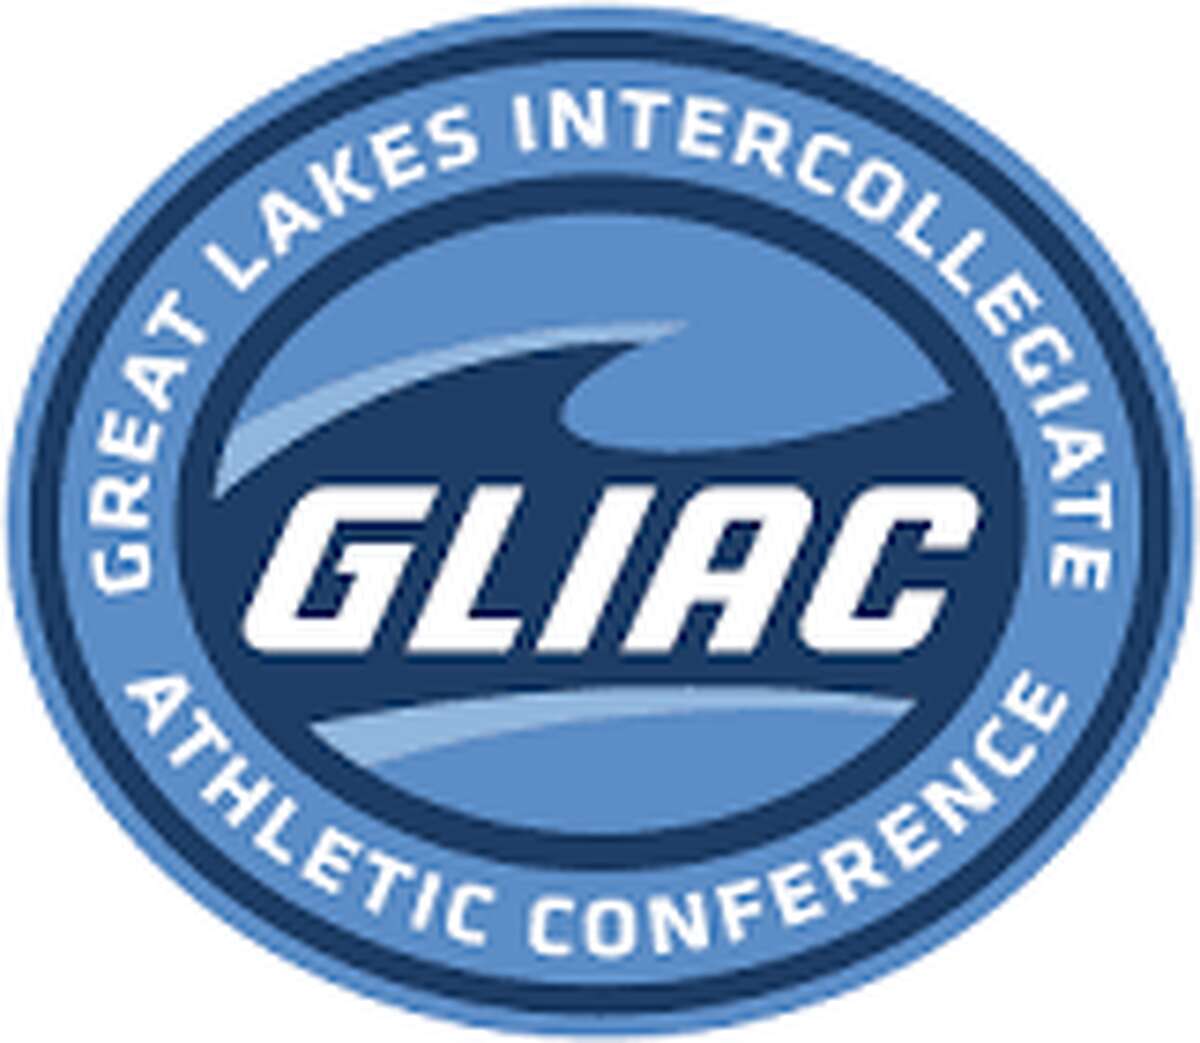 The GLIAC announced Wednesday that all athletic competition will be postponed until at least Jan. 1, 2021.